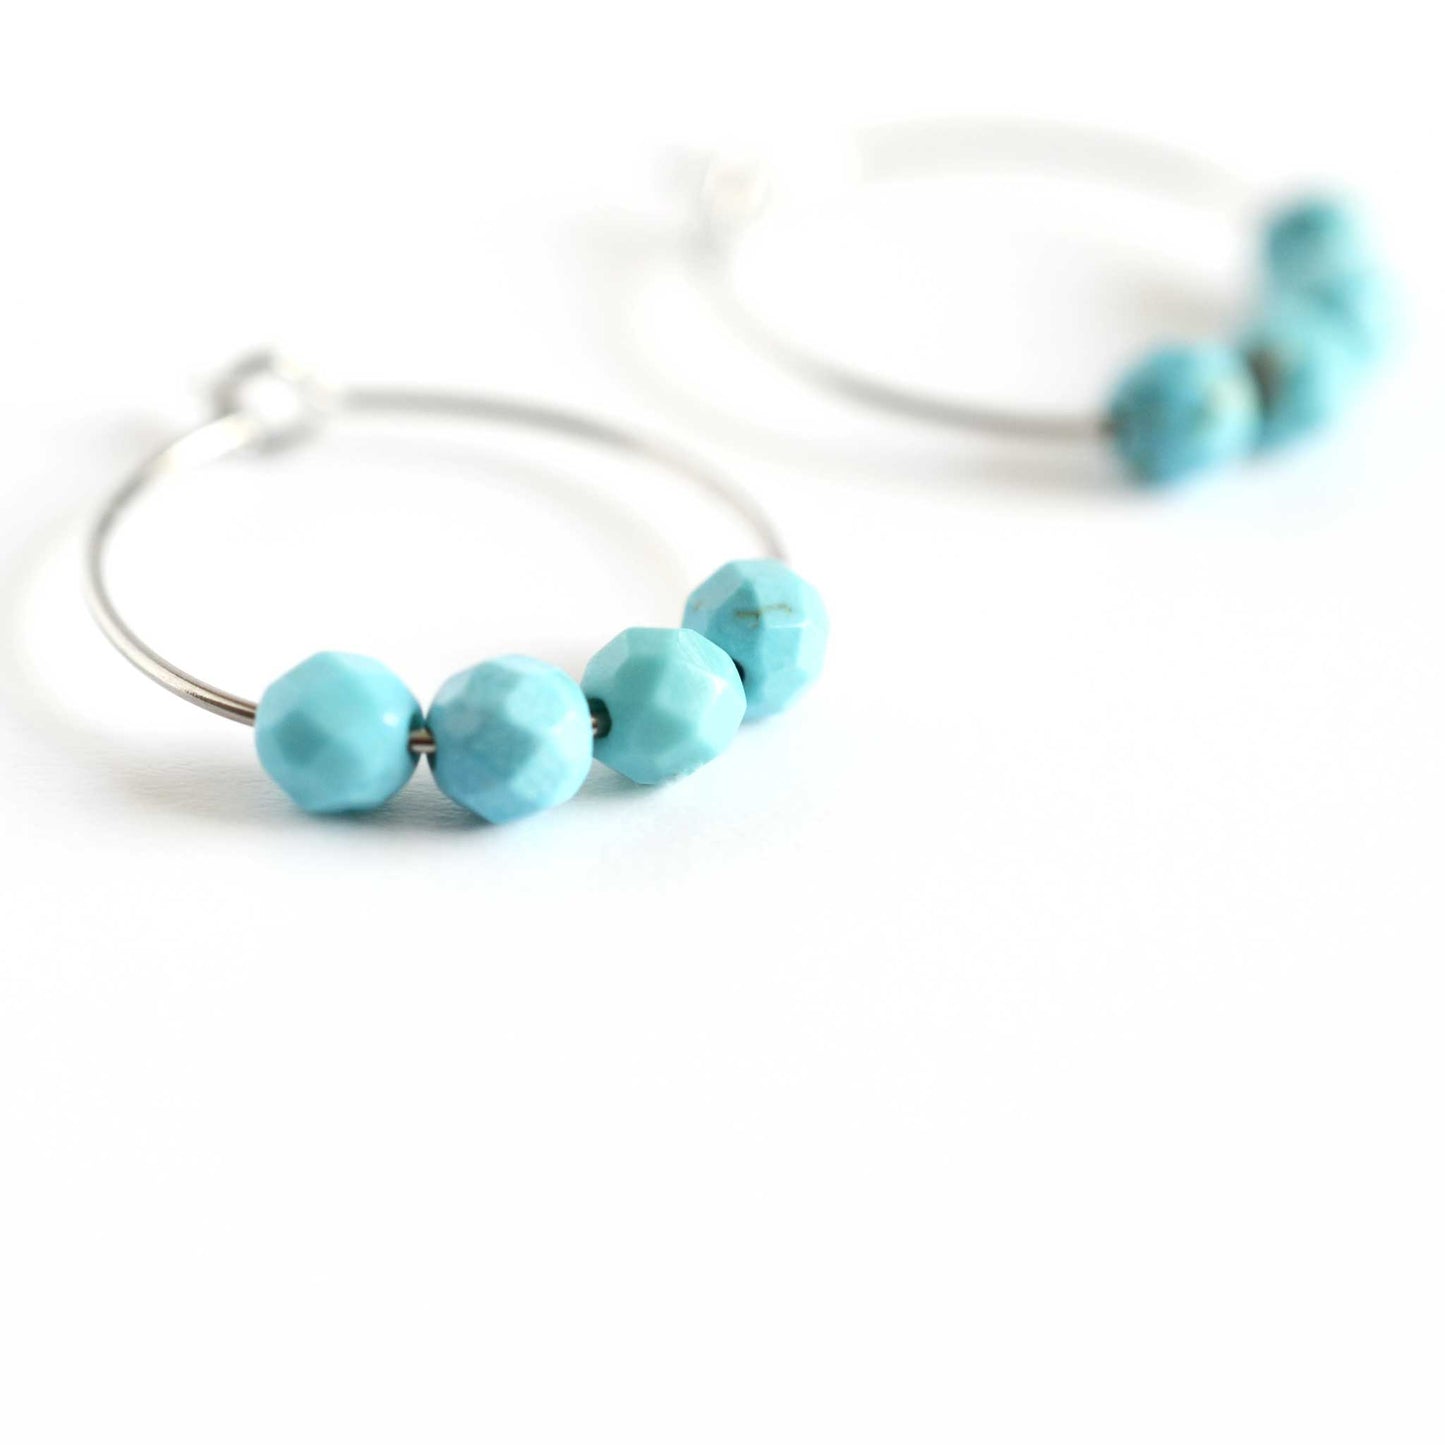 Close up image of Turquoise hoops with four faceted round Turquoise gemstone beads